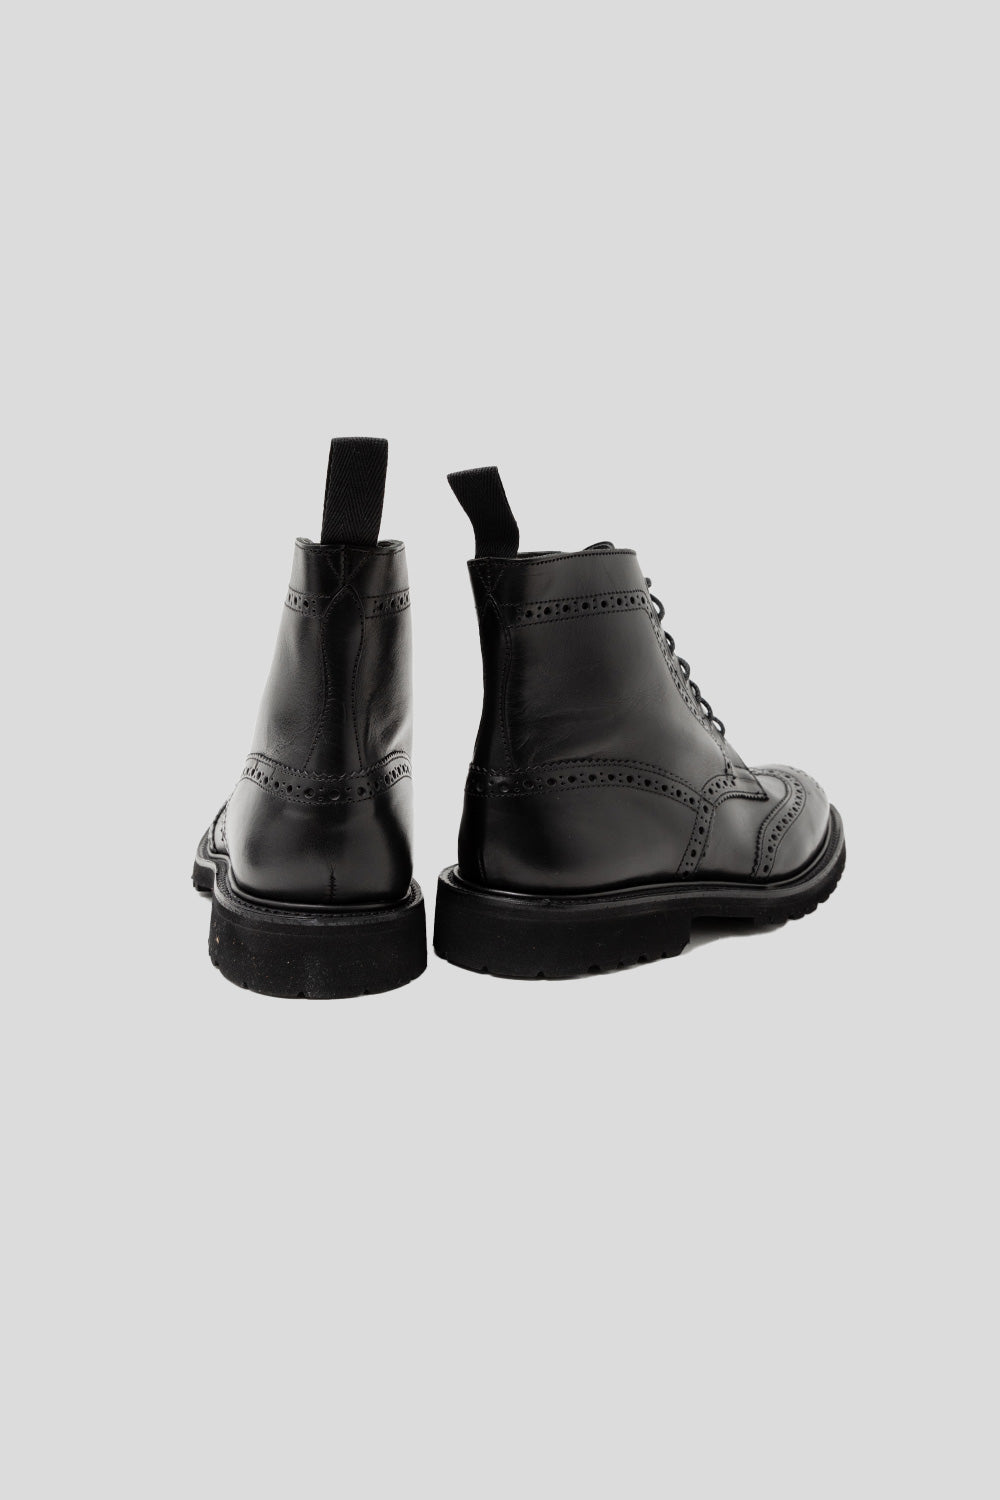 Tricker's Stow Vi-Lite Country Boot in Black Olivvia Classic